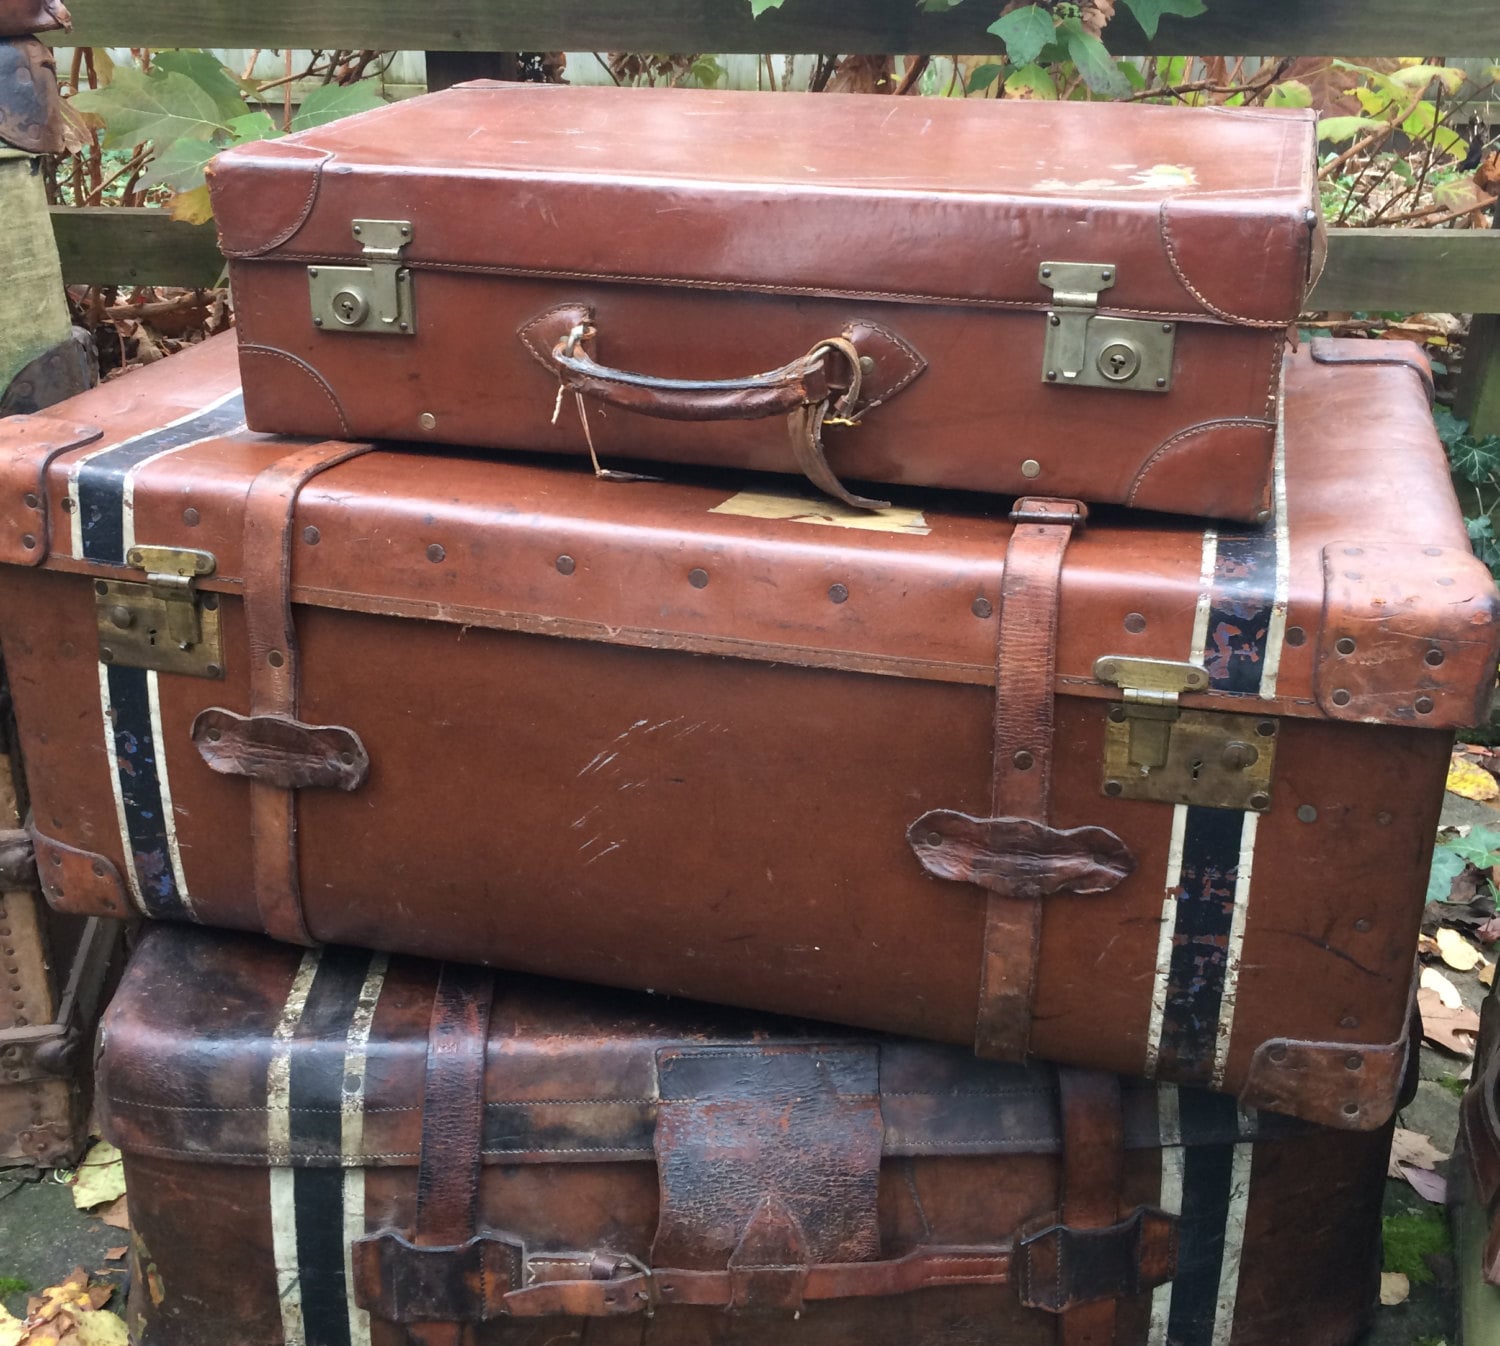 Brown Leather Suitcase, Straps and Buckles, Early 1900s Luggage